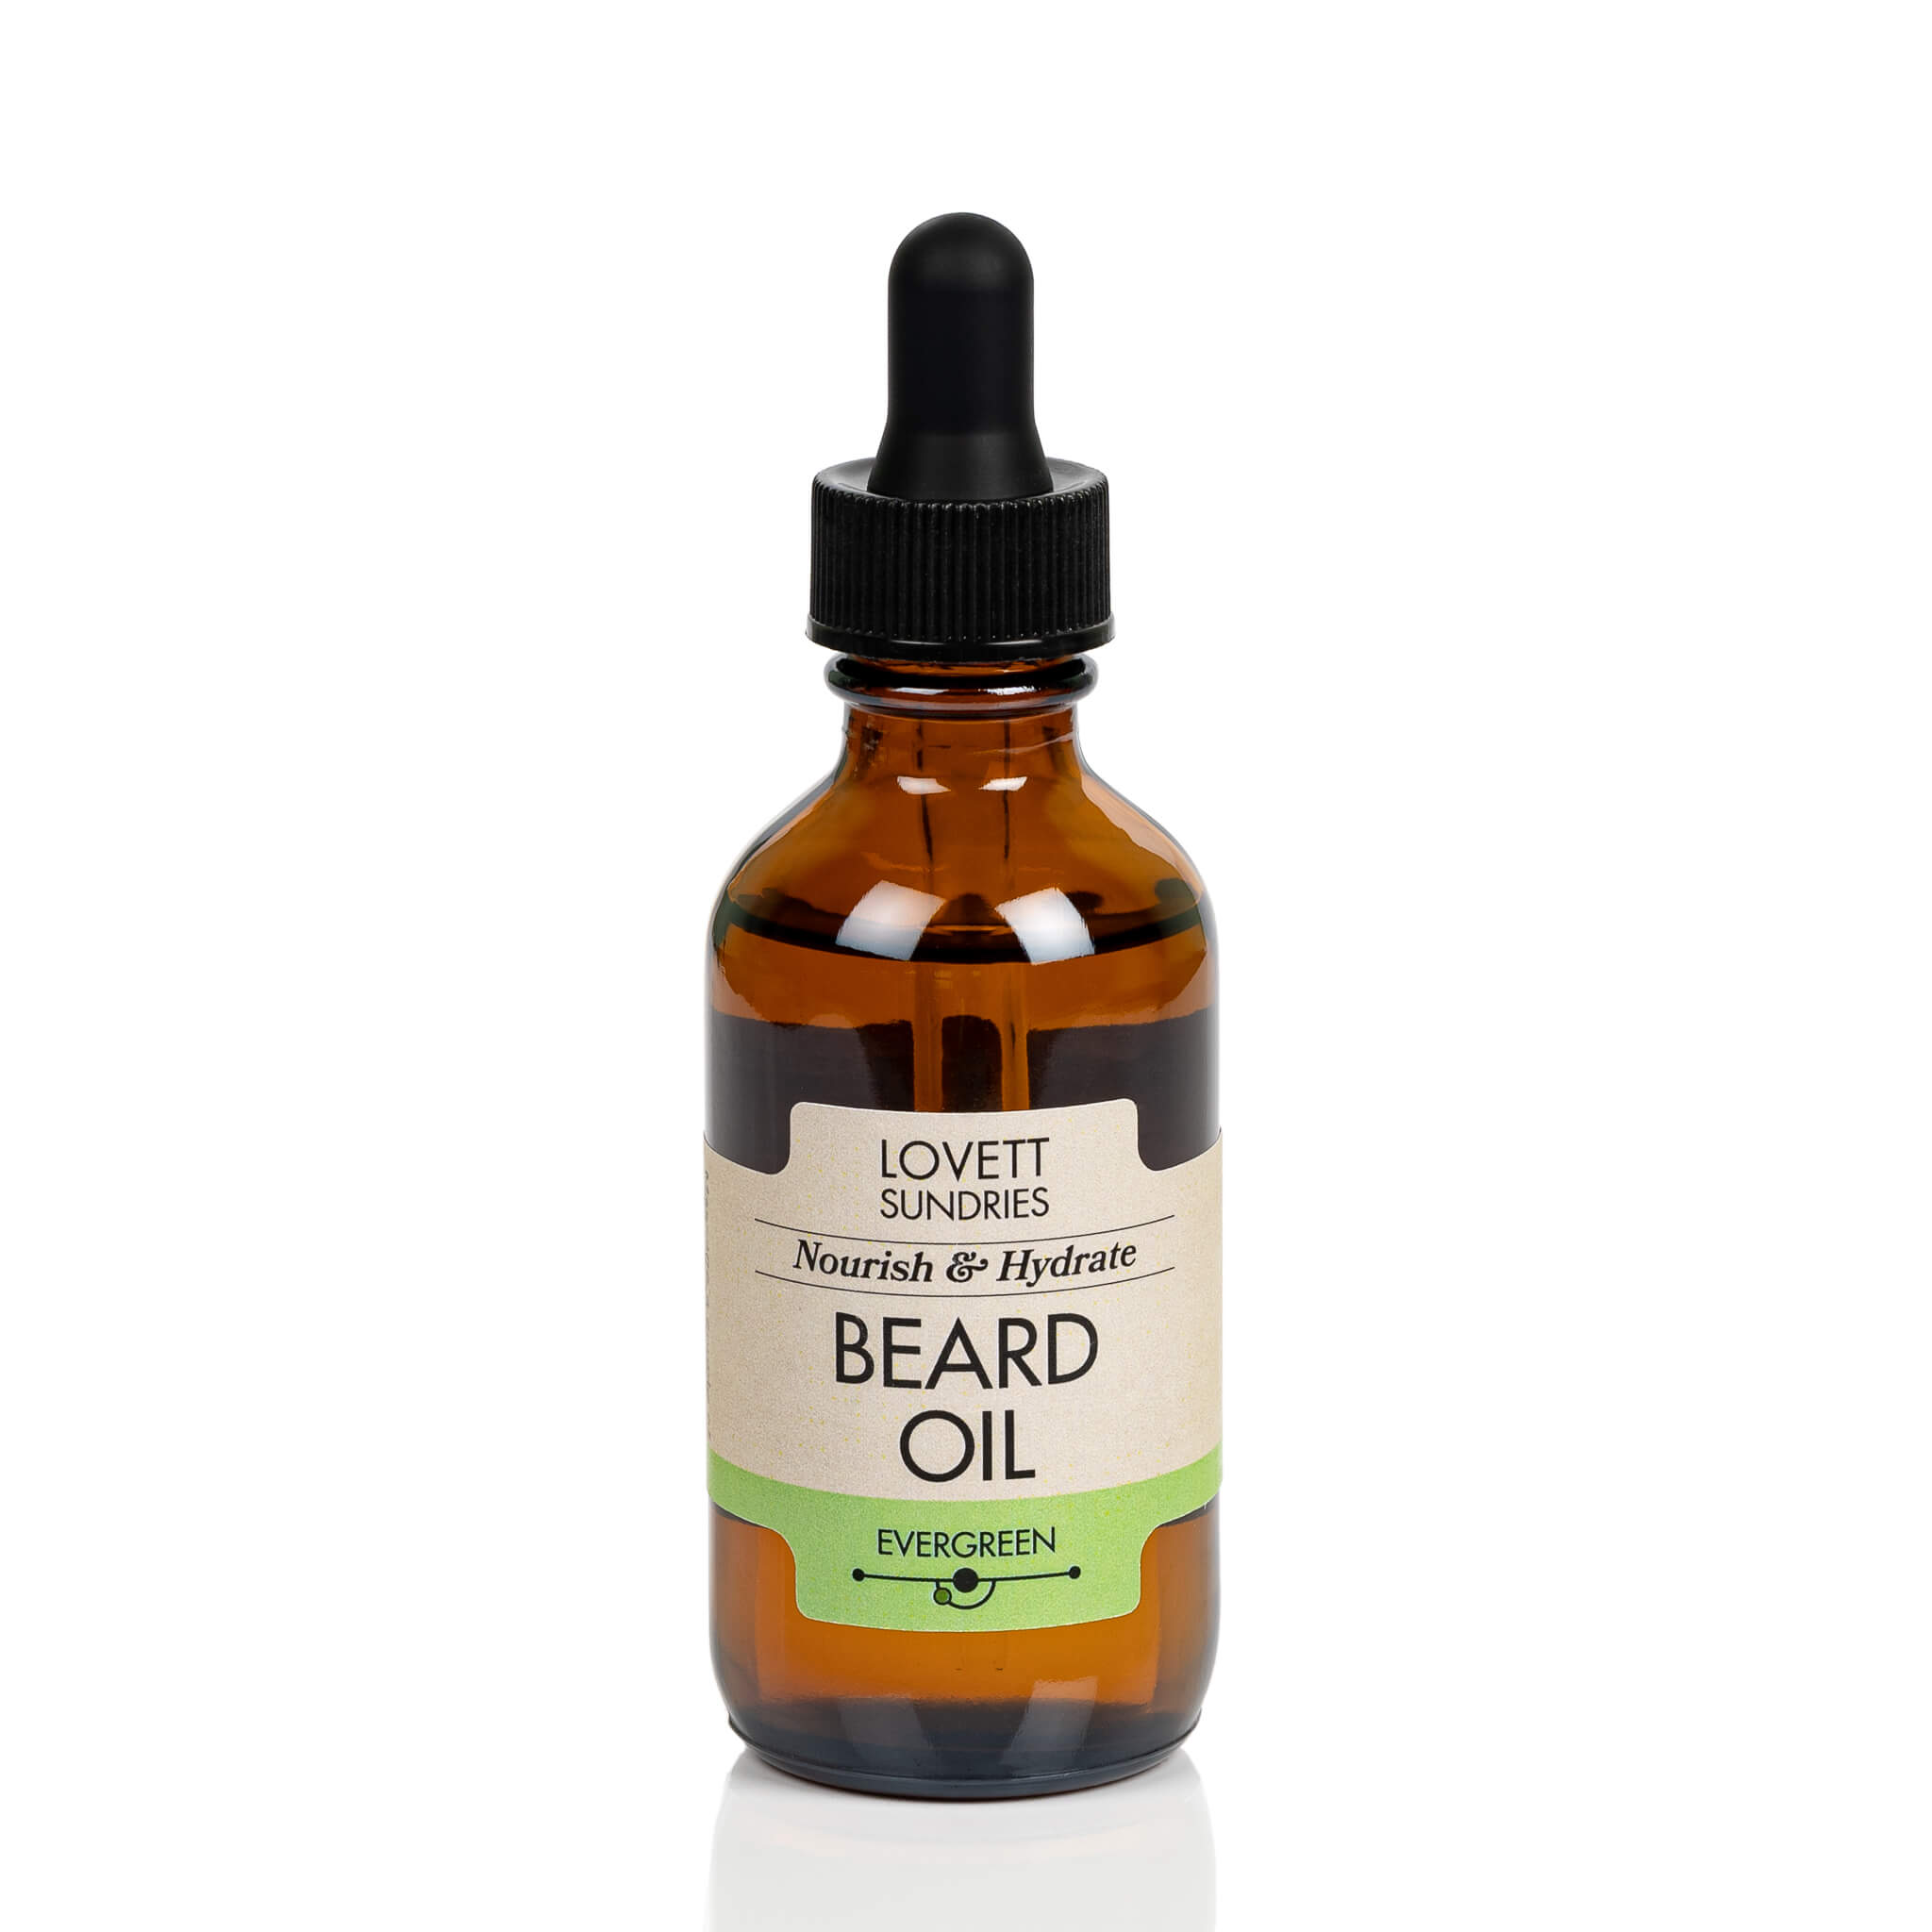 All natural hydrating evergreen scented beard oil in a brown glass bottle with a dropper. 